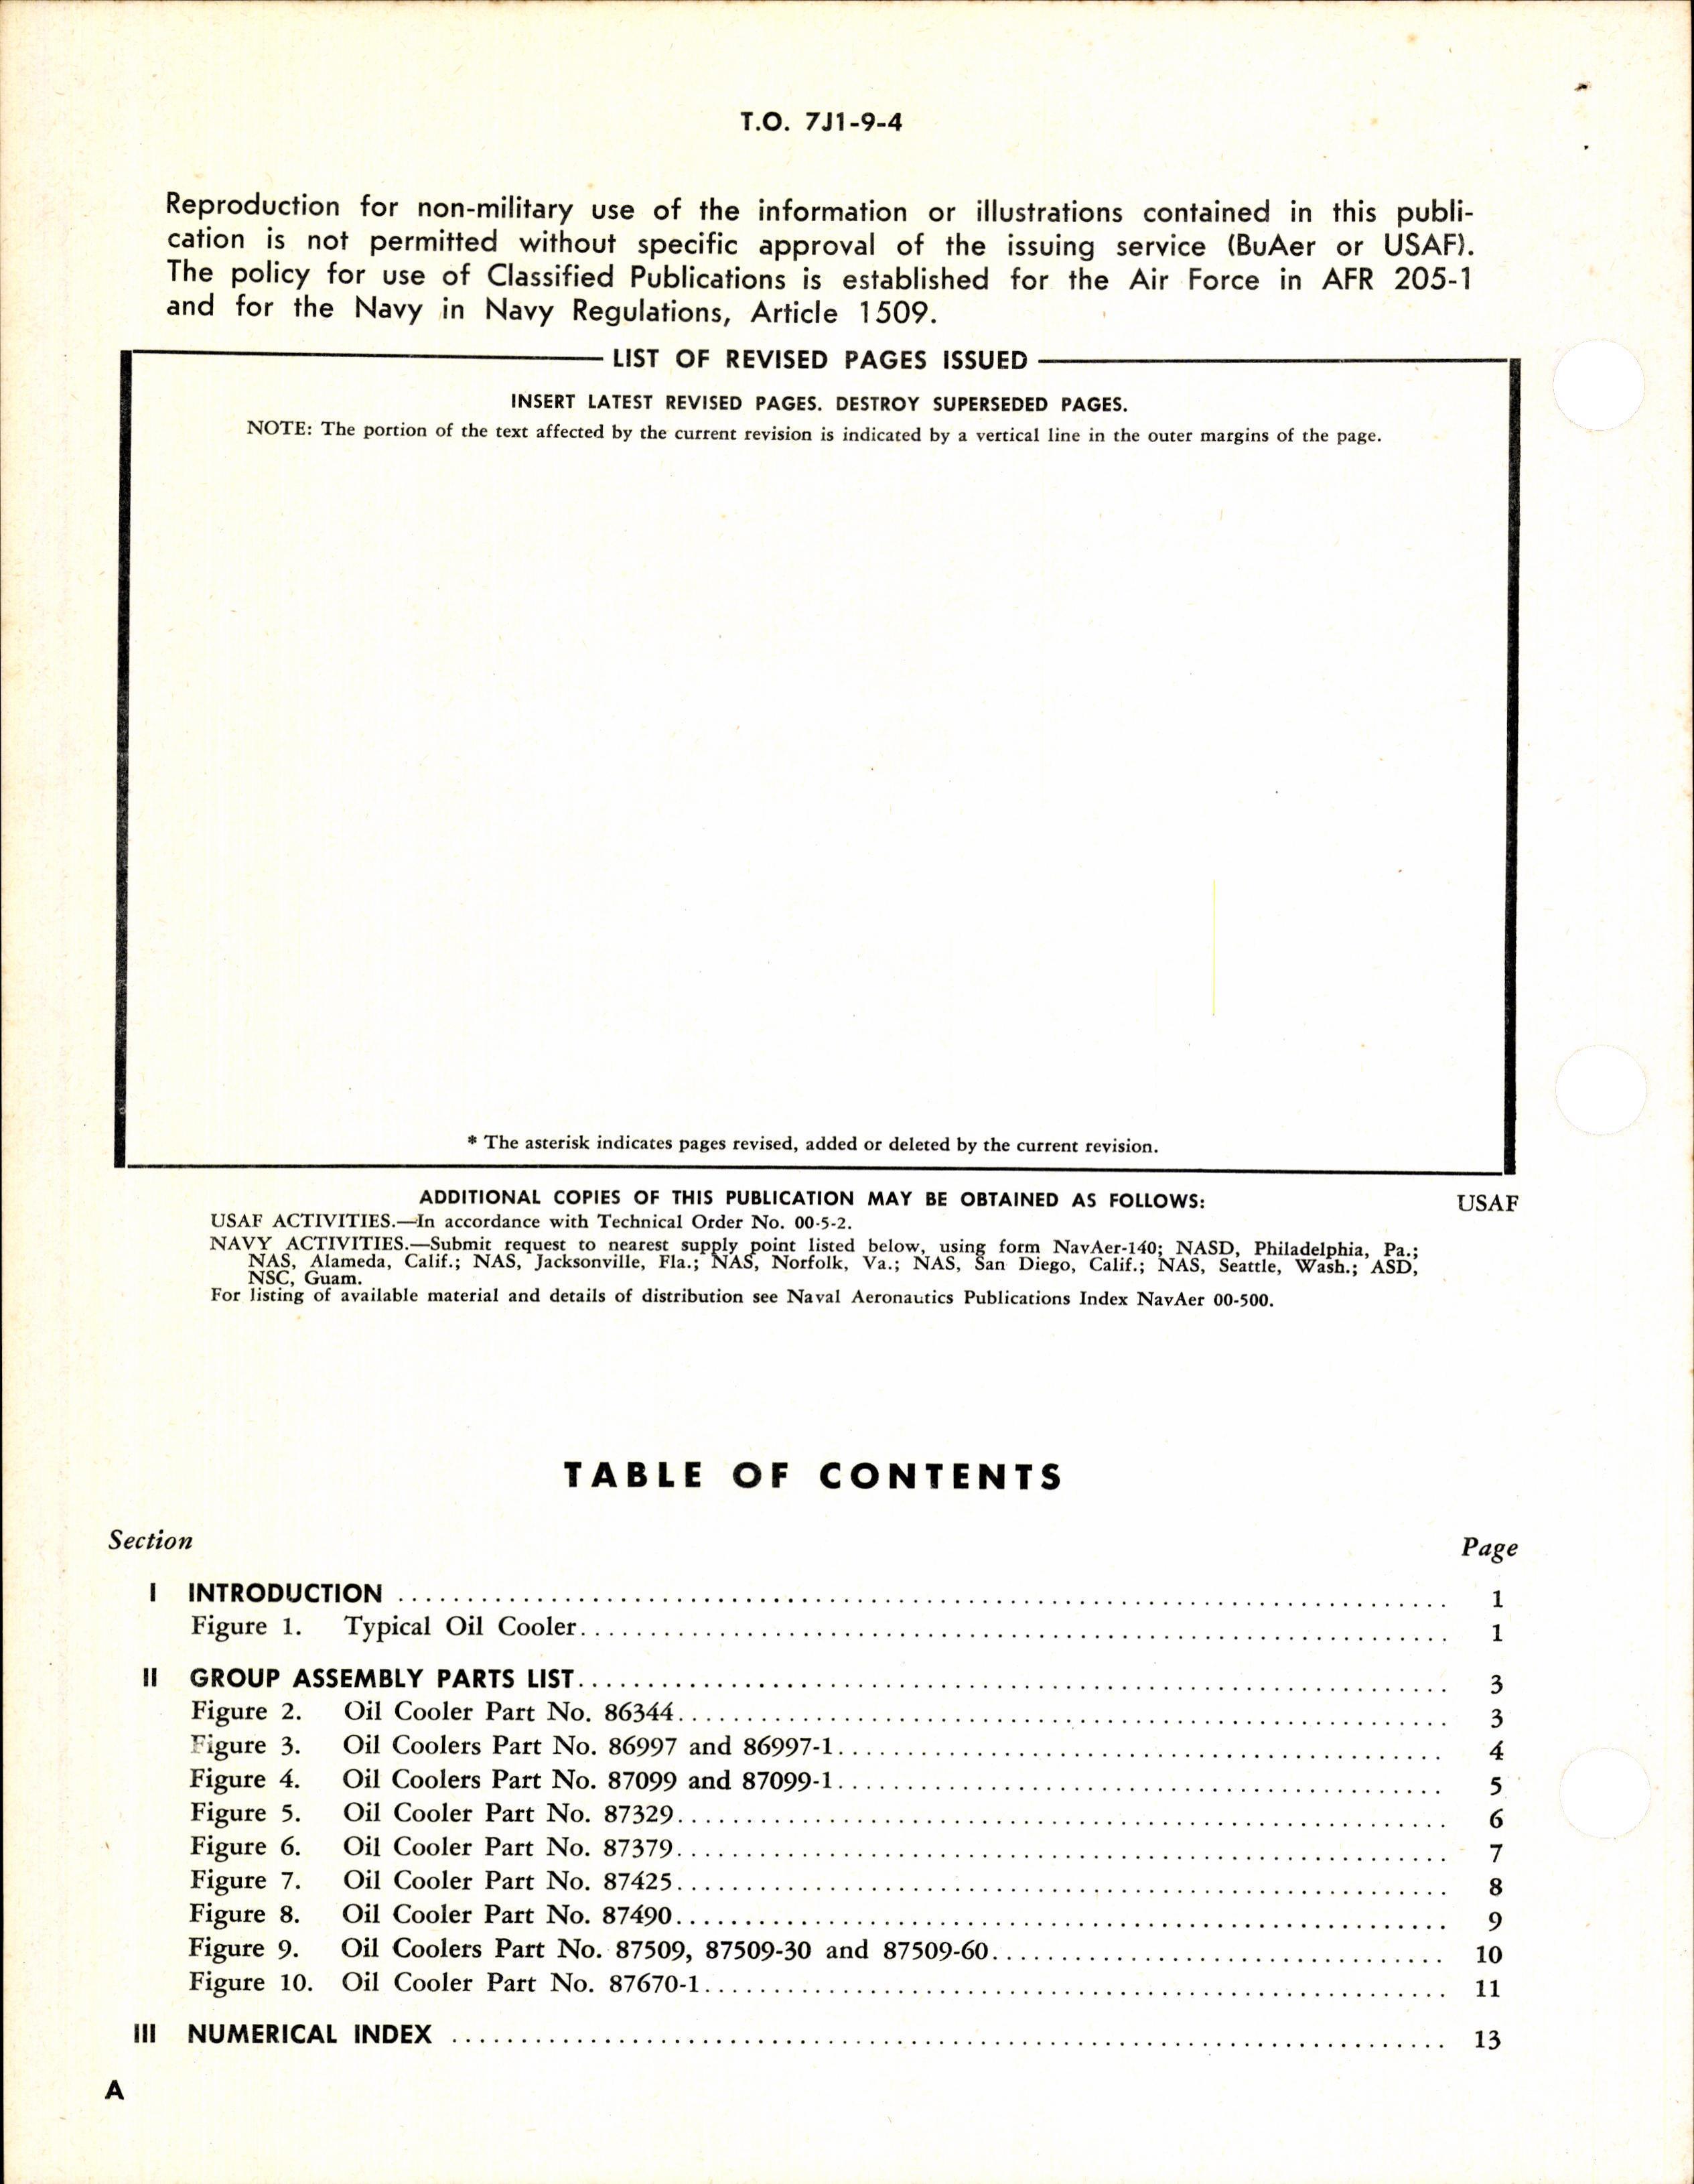 Sample page 2 from AirCorps Library document: Illustrated Parts Breakdown for Oil Coolers